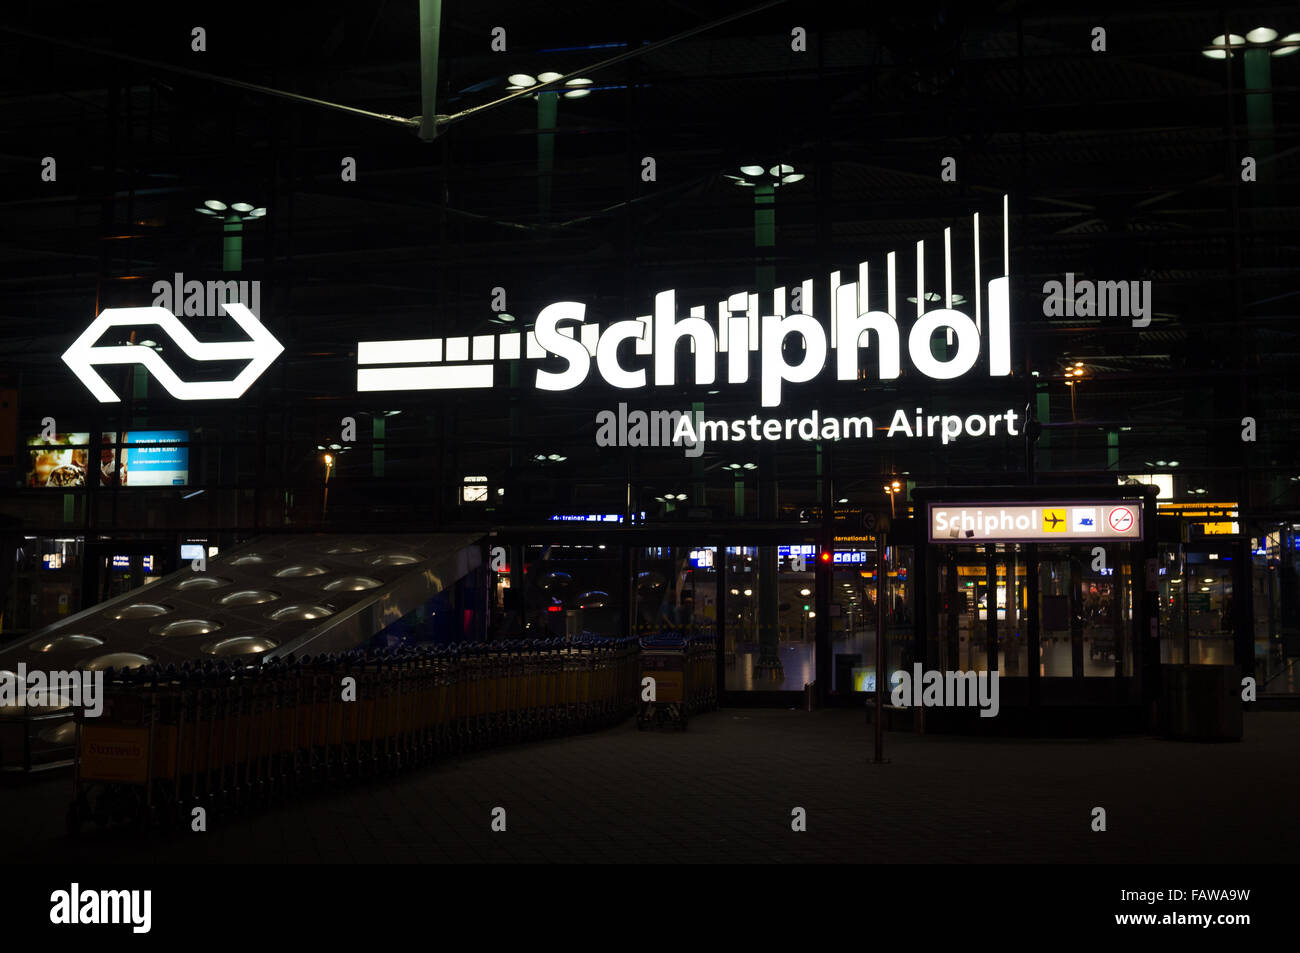 Amsterdam Schiphol Airport Train Station entrance and logo in the night Stock Photo